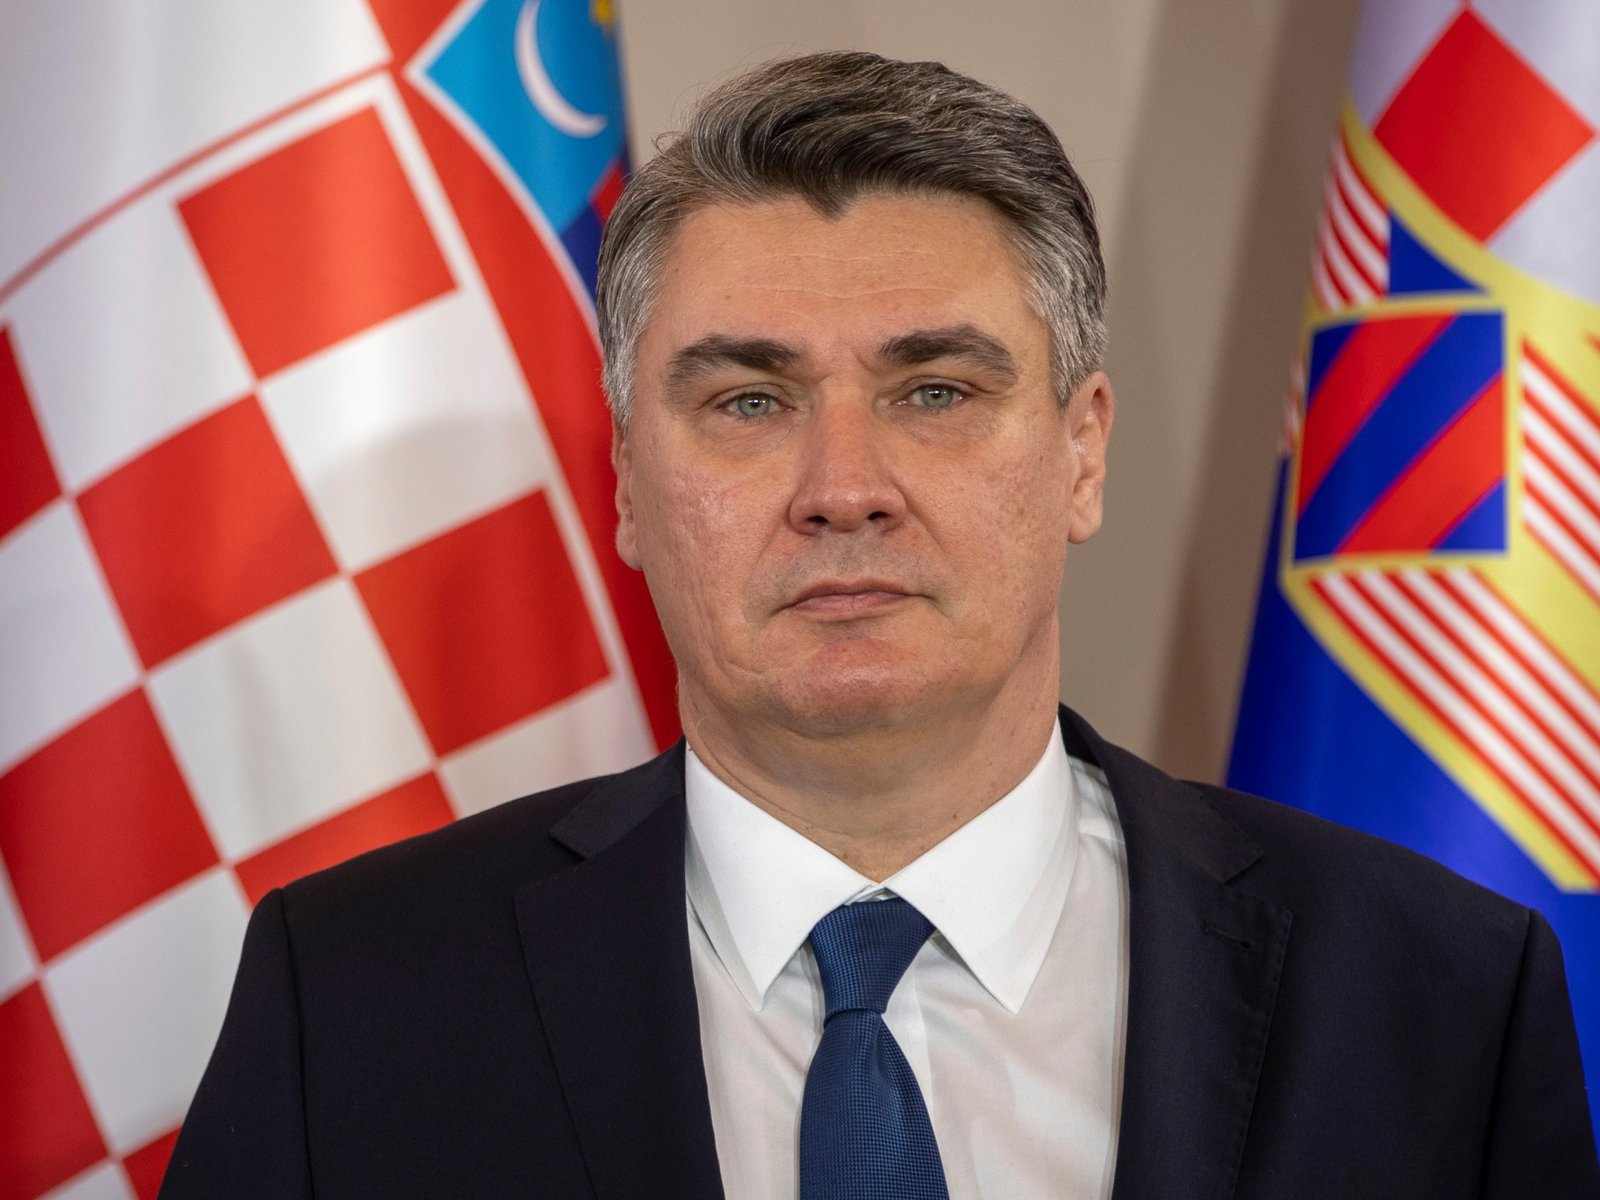 Croatias top court bars President Milanovic from becoming prime minister | Politics News